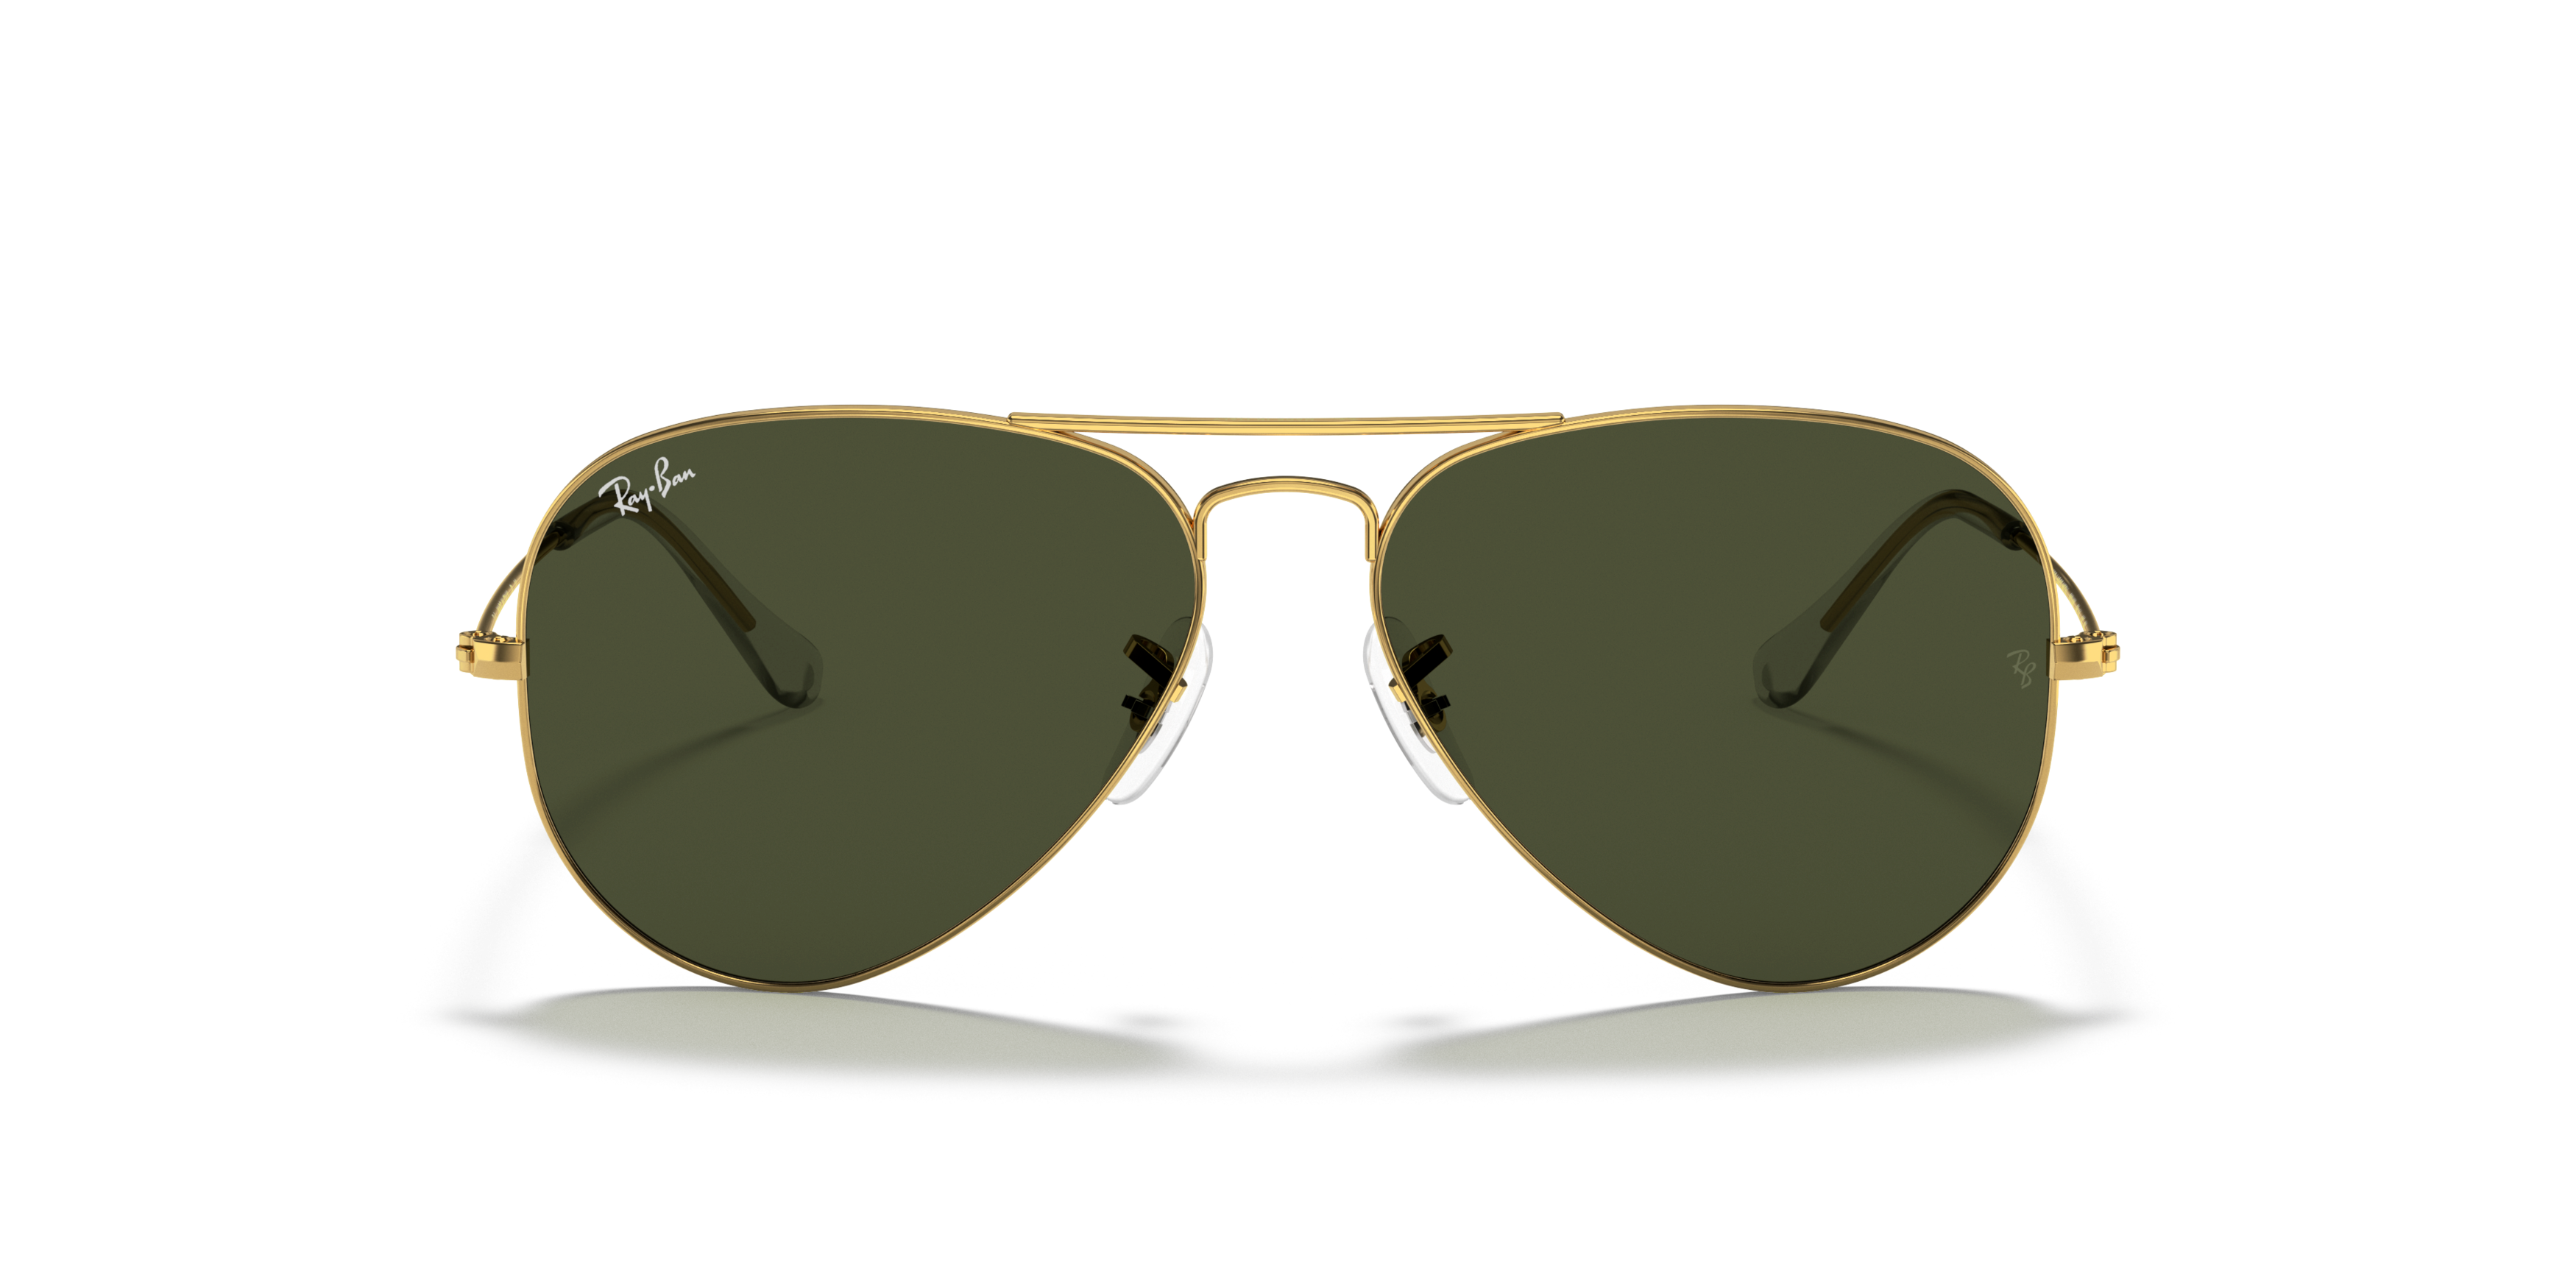 [products.image.front] Ray-Ban Aviator Classic RB3025 L0205